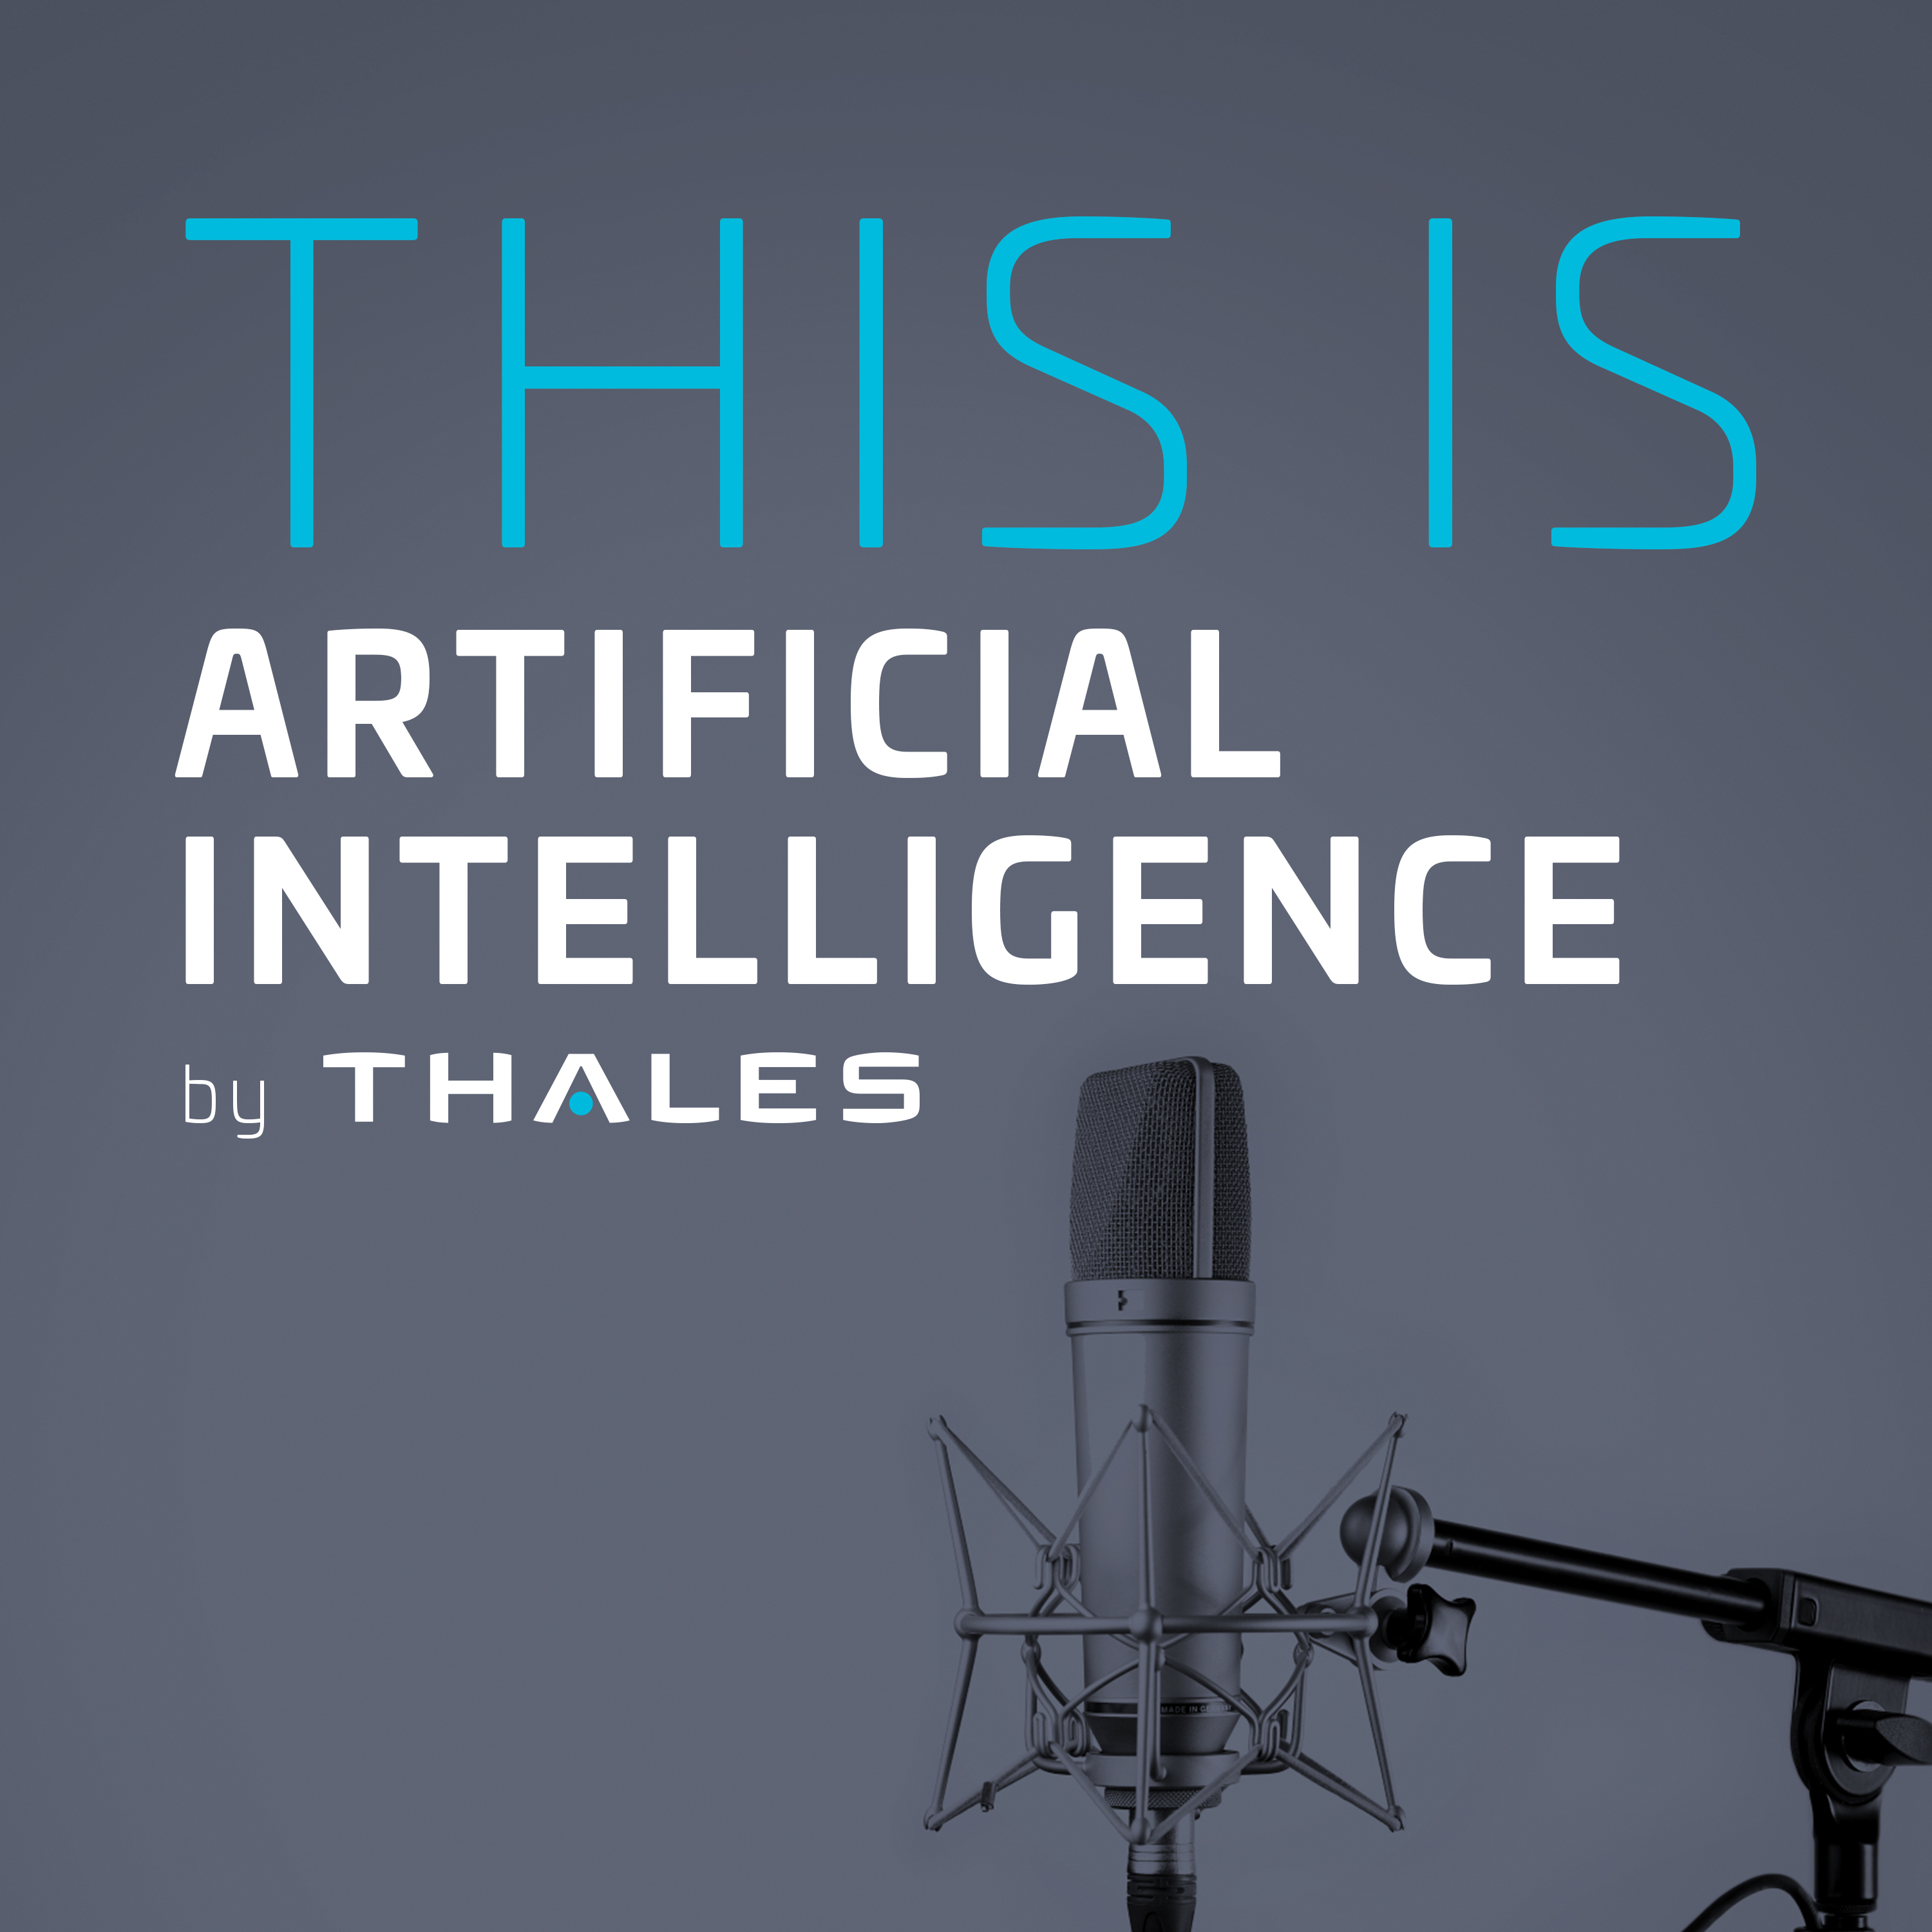 What's the future of Artificial Intelligence in Critical Environments?